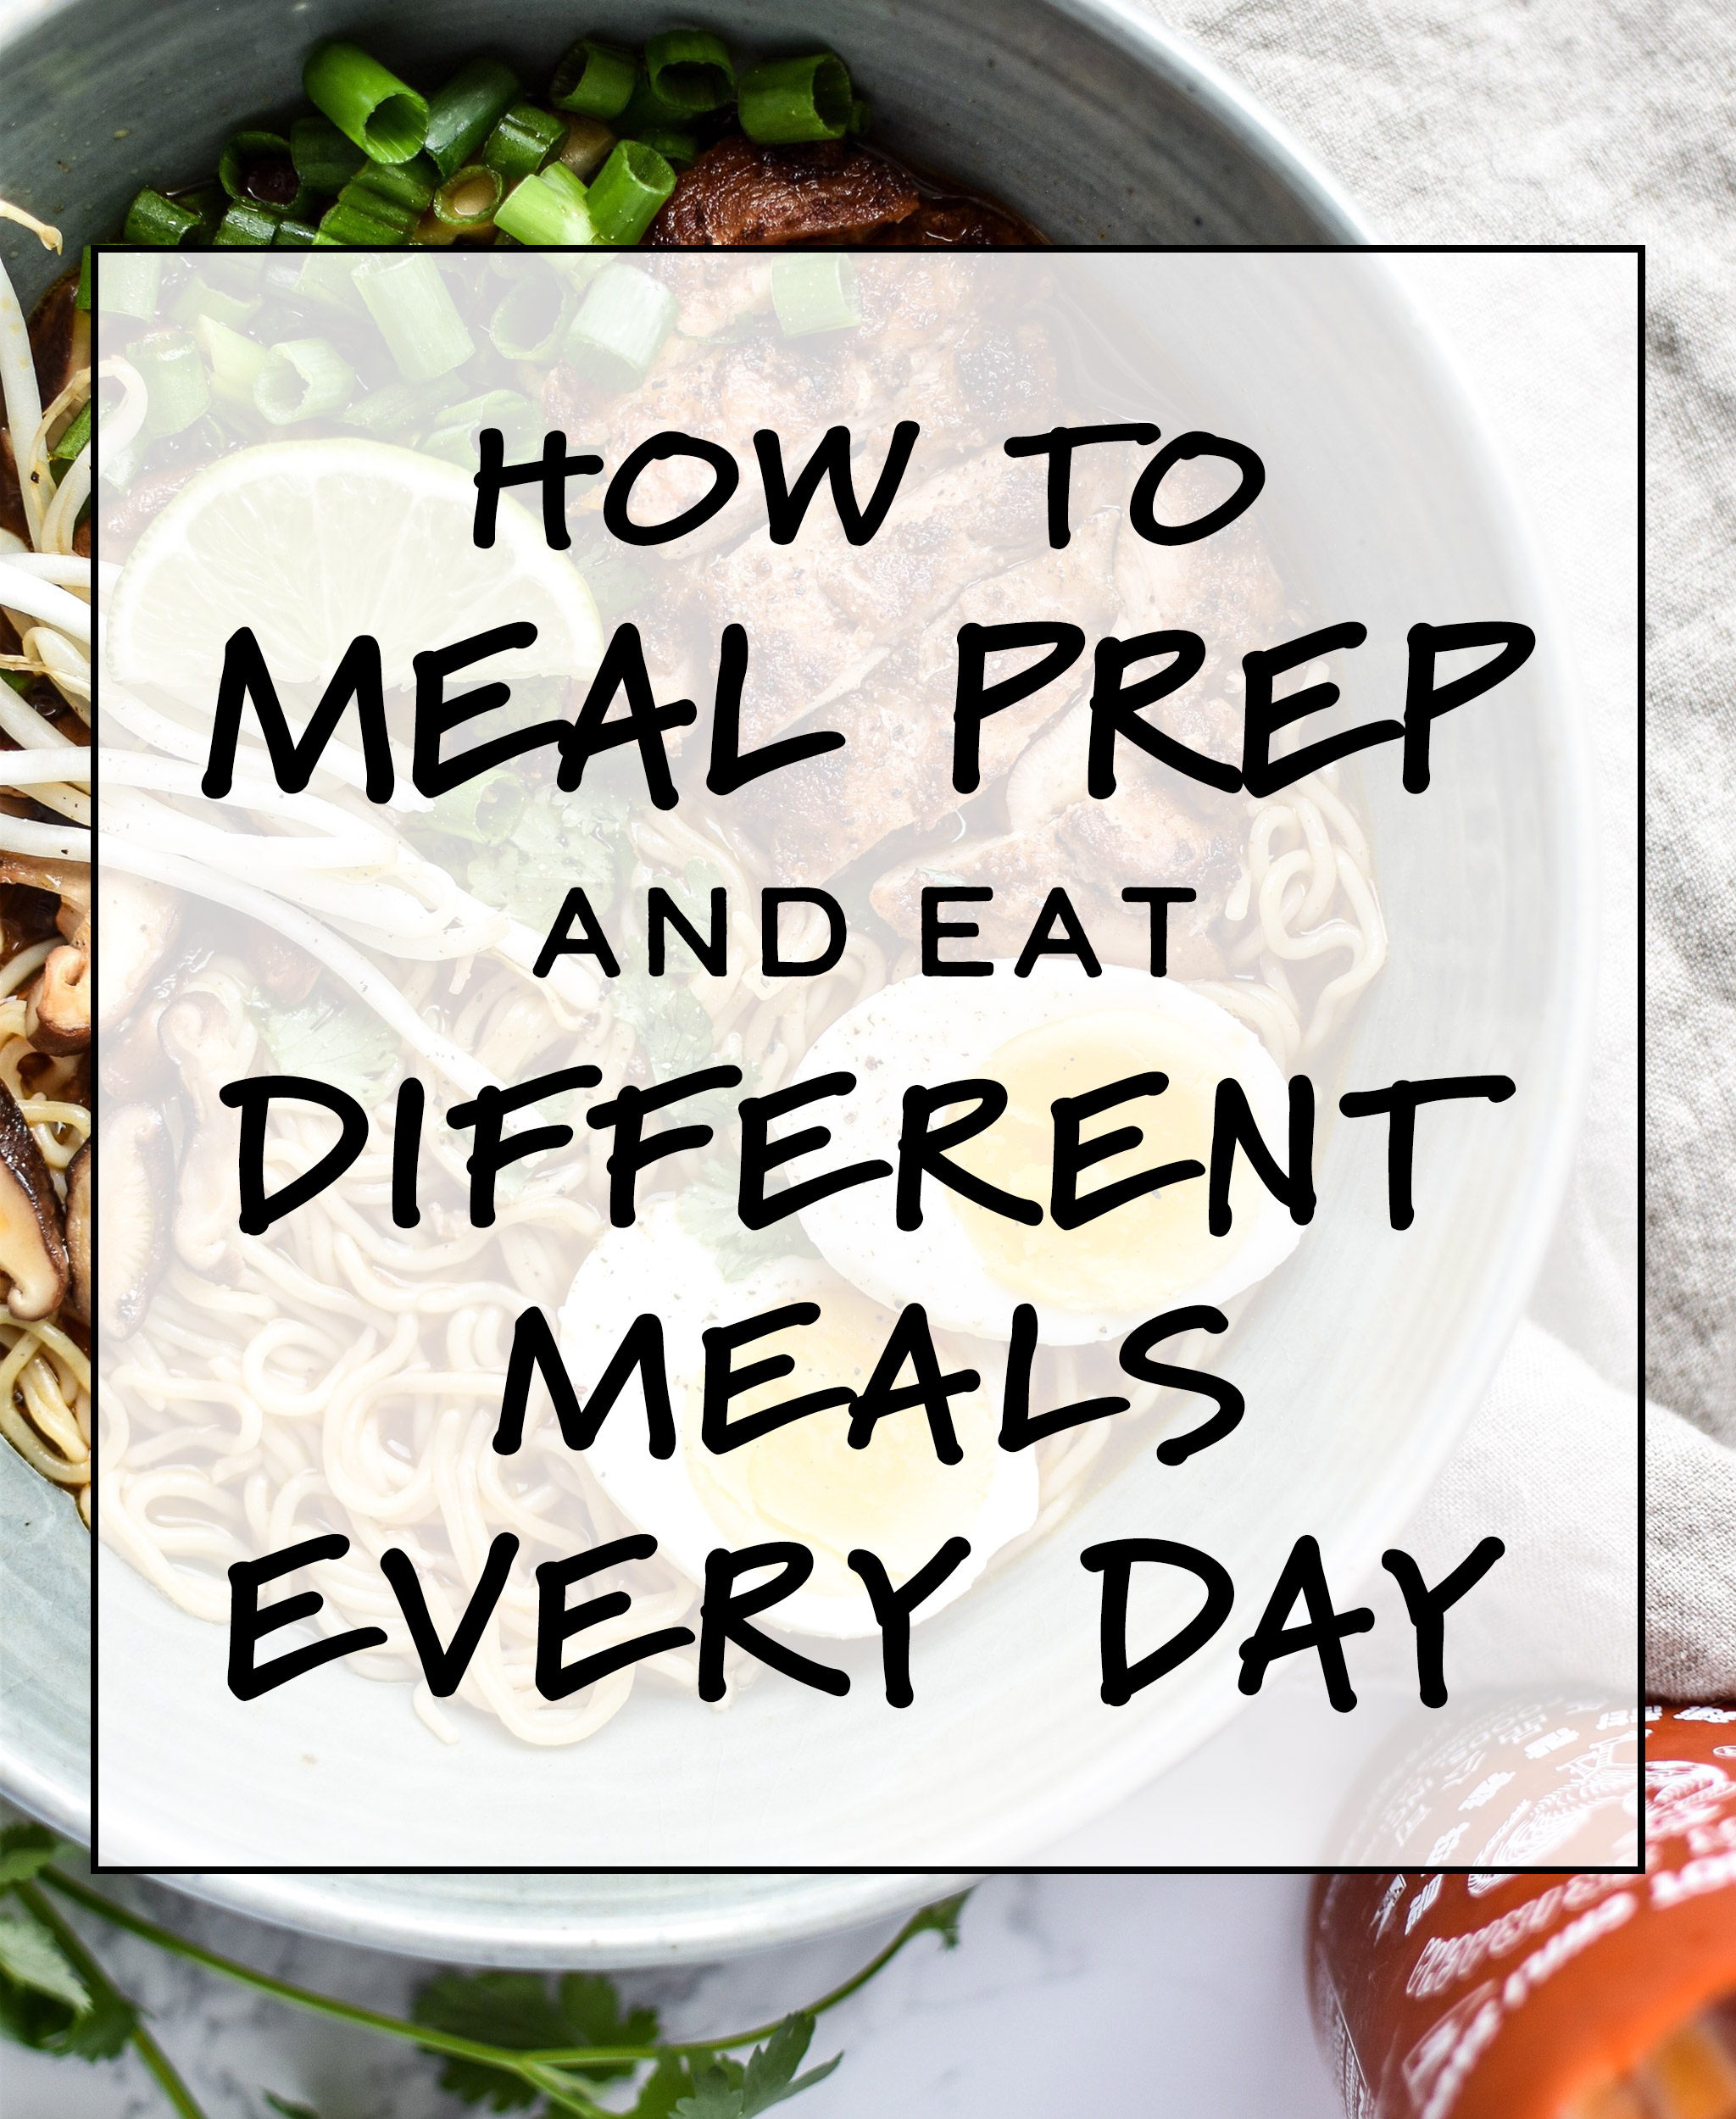 Cover photo for the article How to Meal Prep and Eat Different Meals Every Day